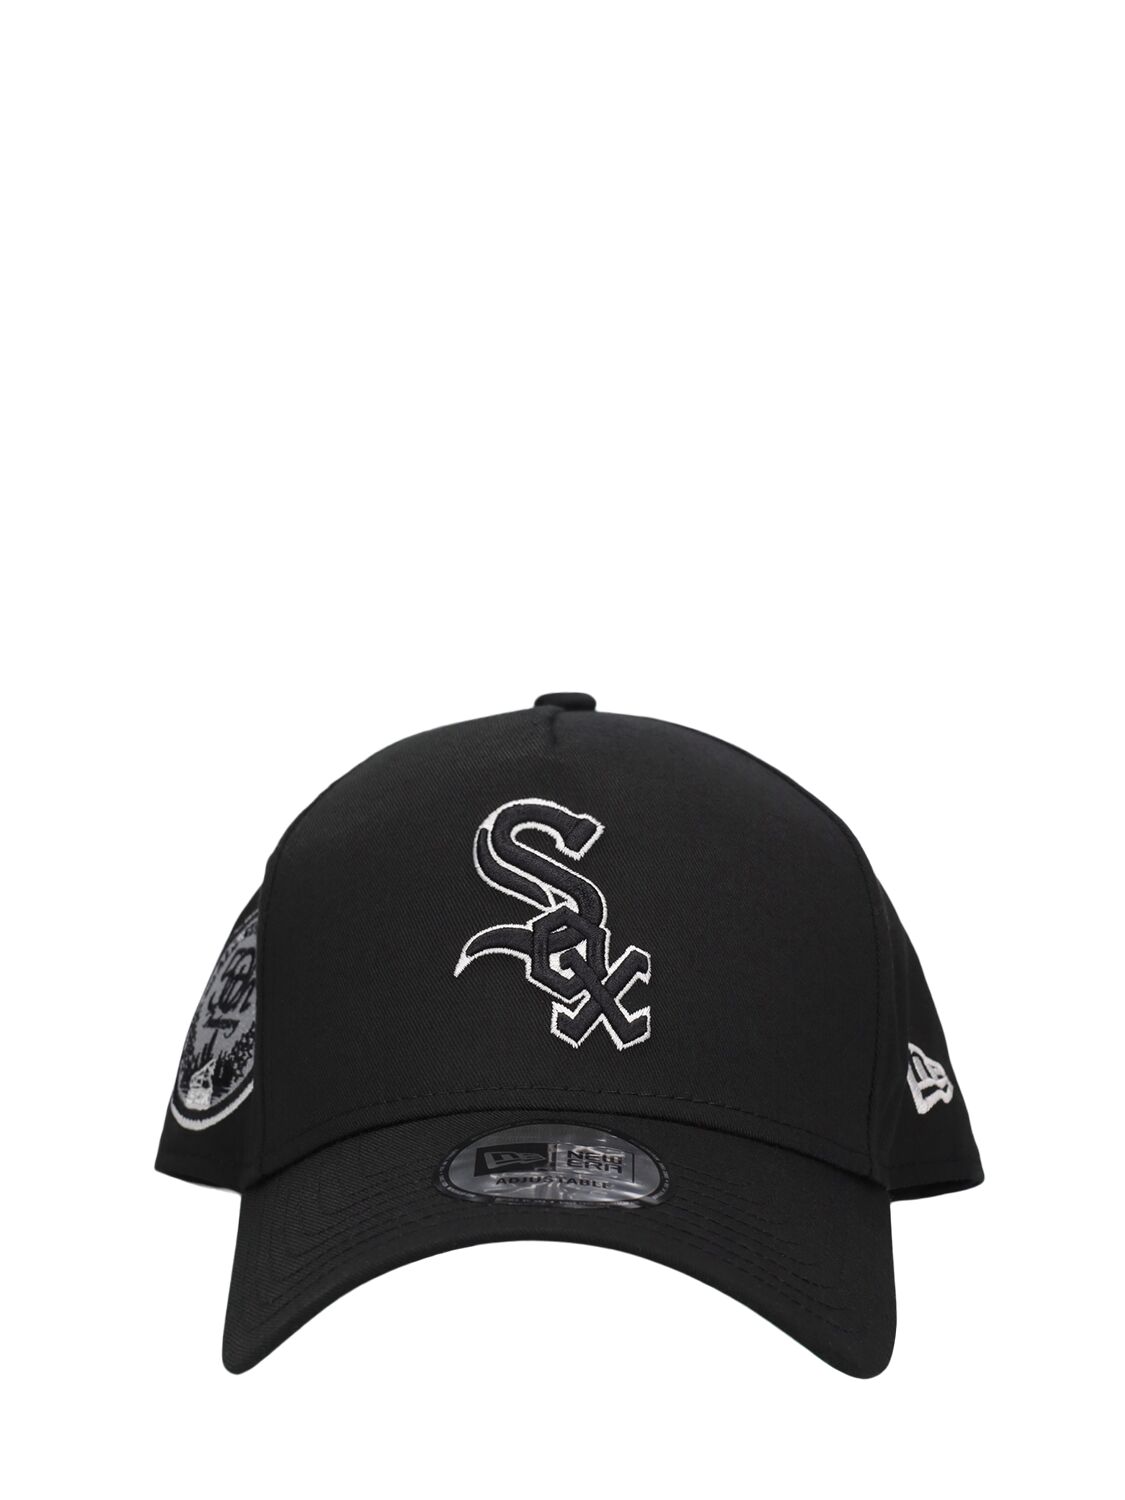 Image of Chicago White Sox 9forty A-frame Cap